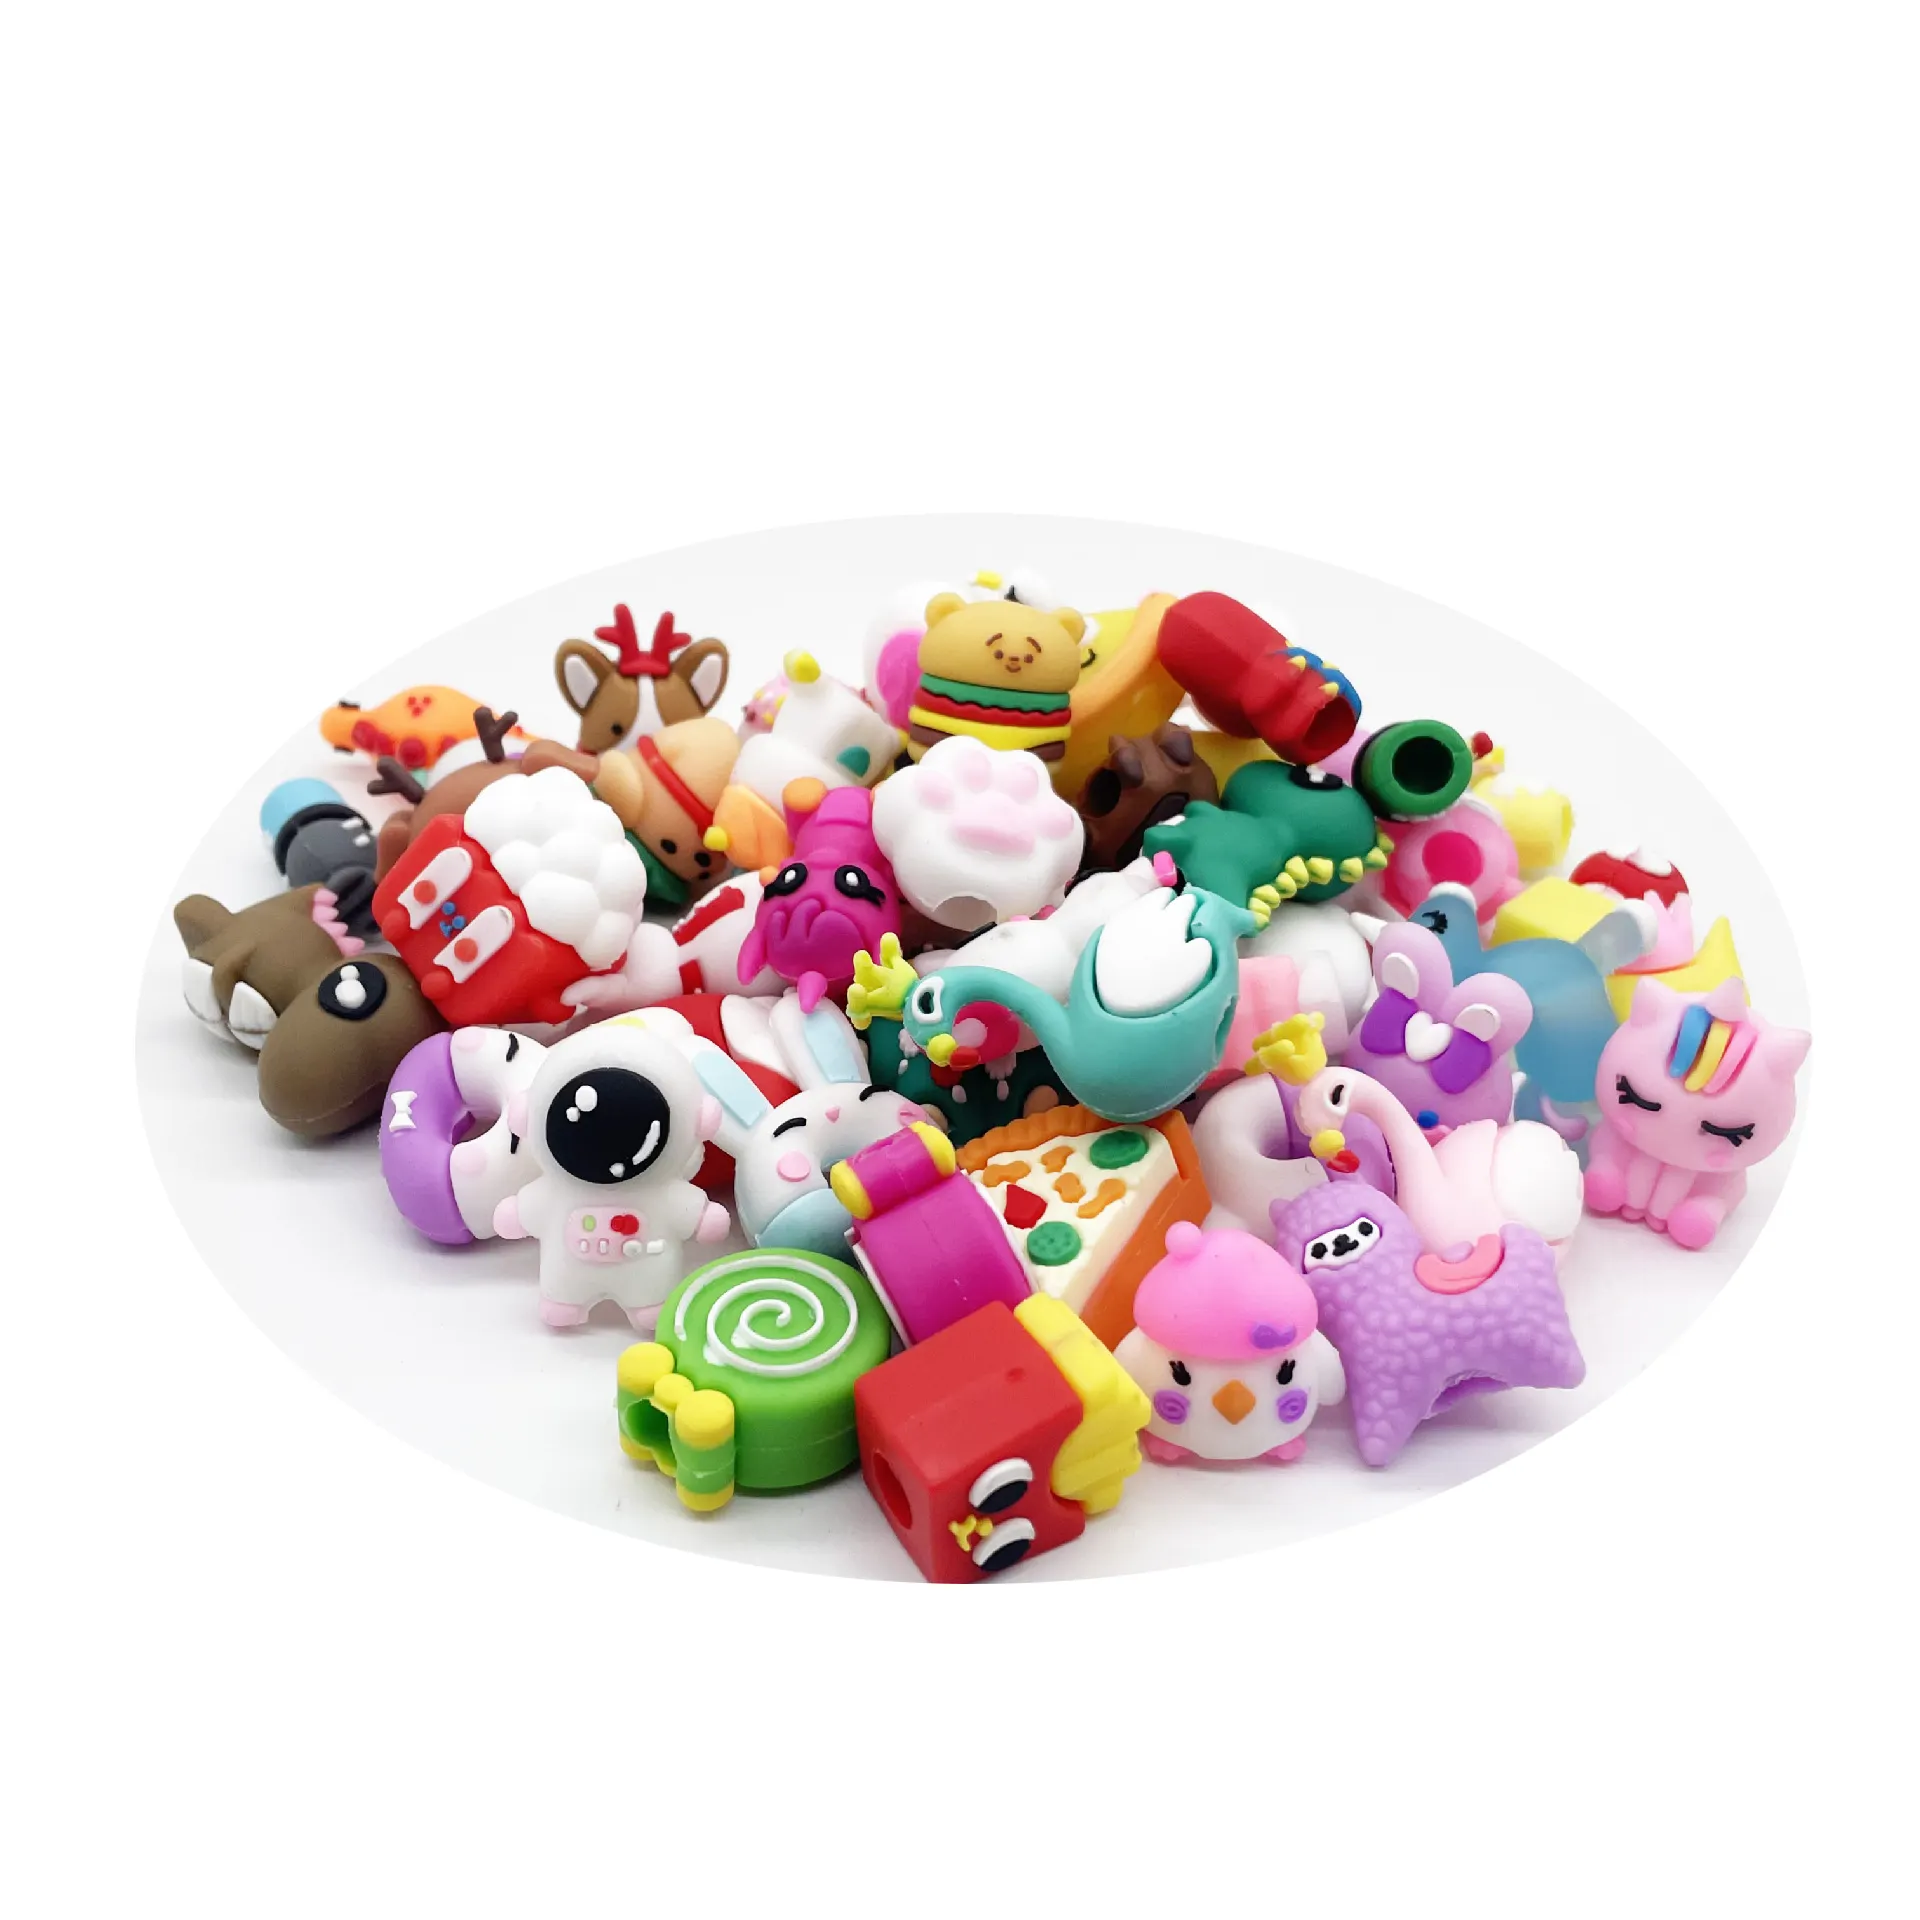 2023 Hot Item 3D Mini Cute Cartoon Capsule Toy Plastic PVC simulation of animal figures food accessories and other small toys